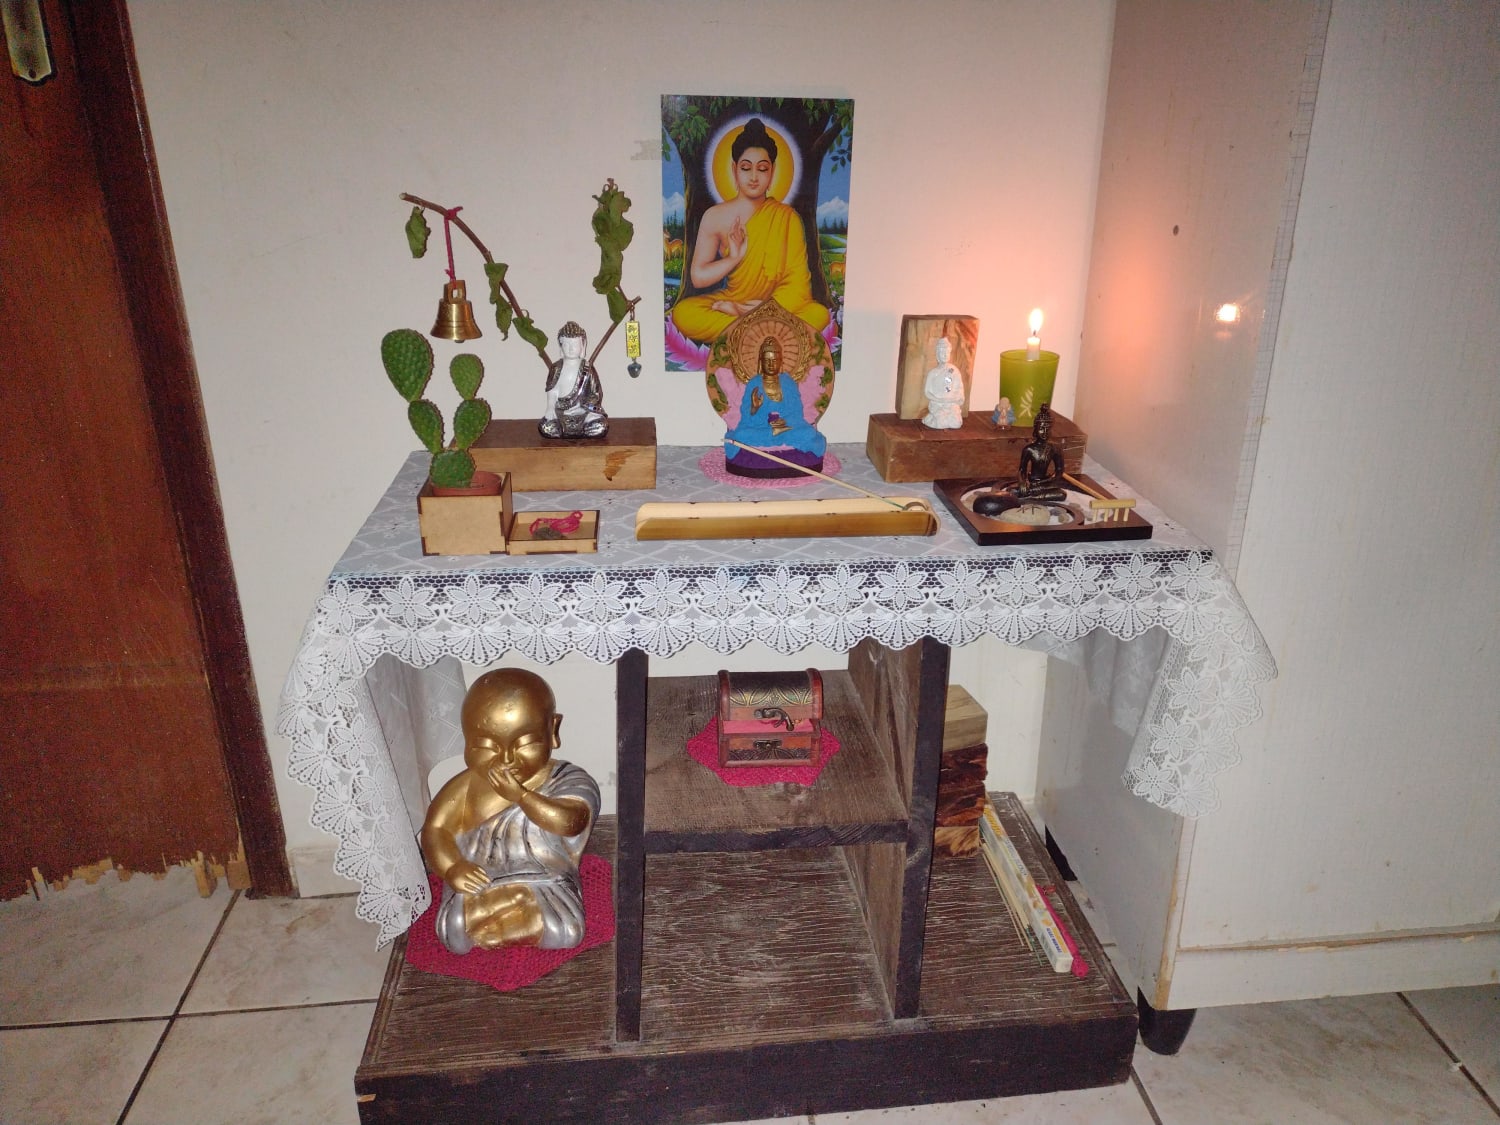 Update to my (18yo brazilian) altar. With every little thing I add and every day that passes, my devotion grows more and more ❤️